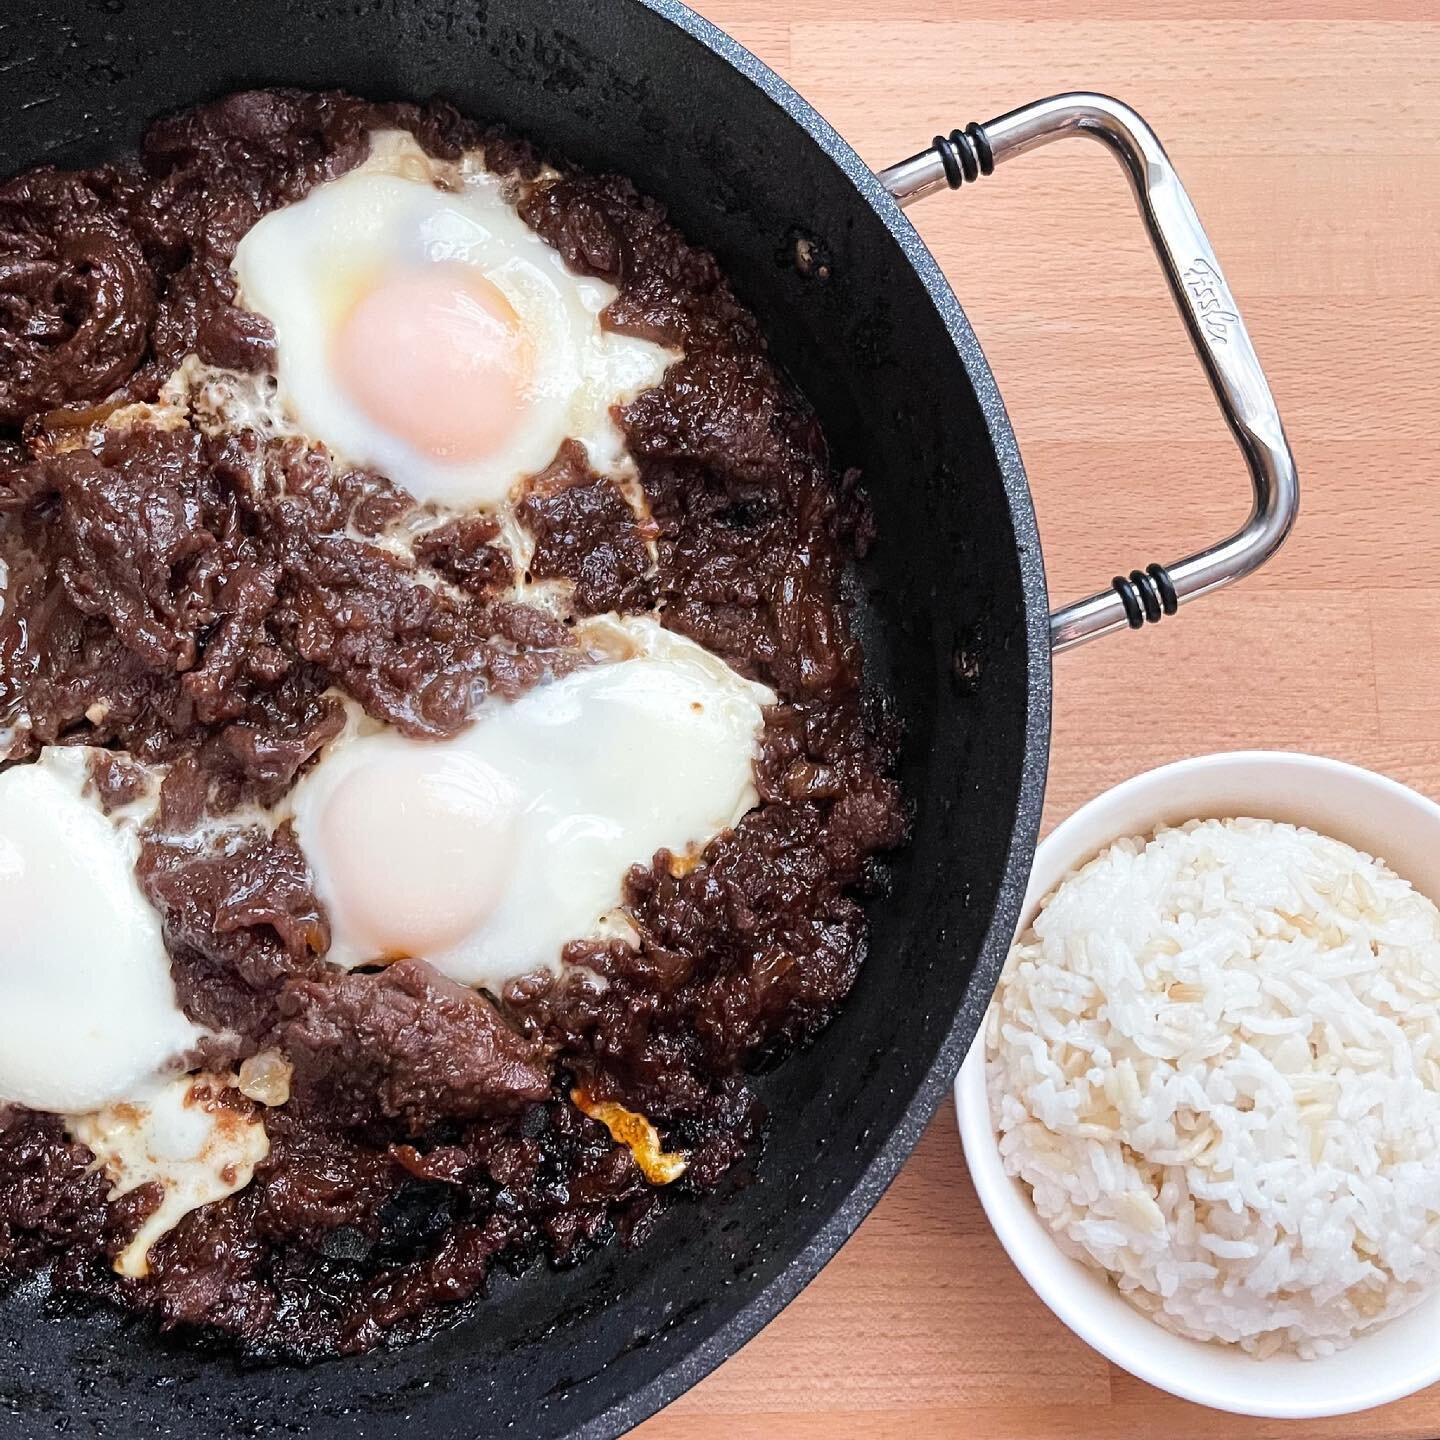 This is what a quick #BrunchwithFissler looks like! 
#sponsored @fisslerusa 

Beef Bulgogi with eggs 🍳 and some steamed rice (feel free to switch it out for cauliflower rice or more veggies to keep it low carb). Fissler has been my go to pans! I use